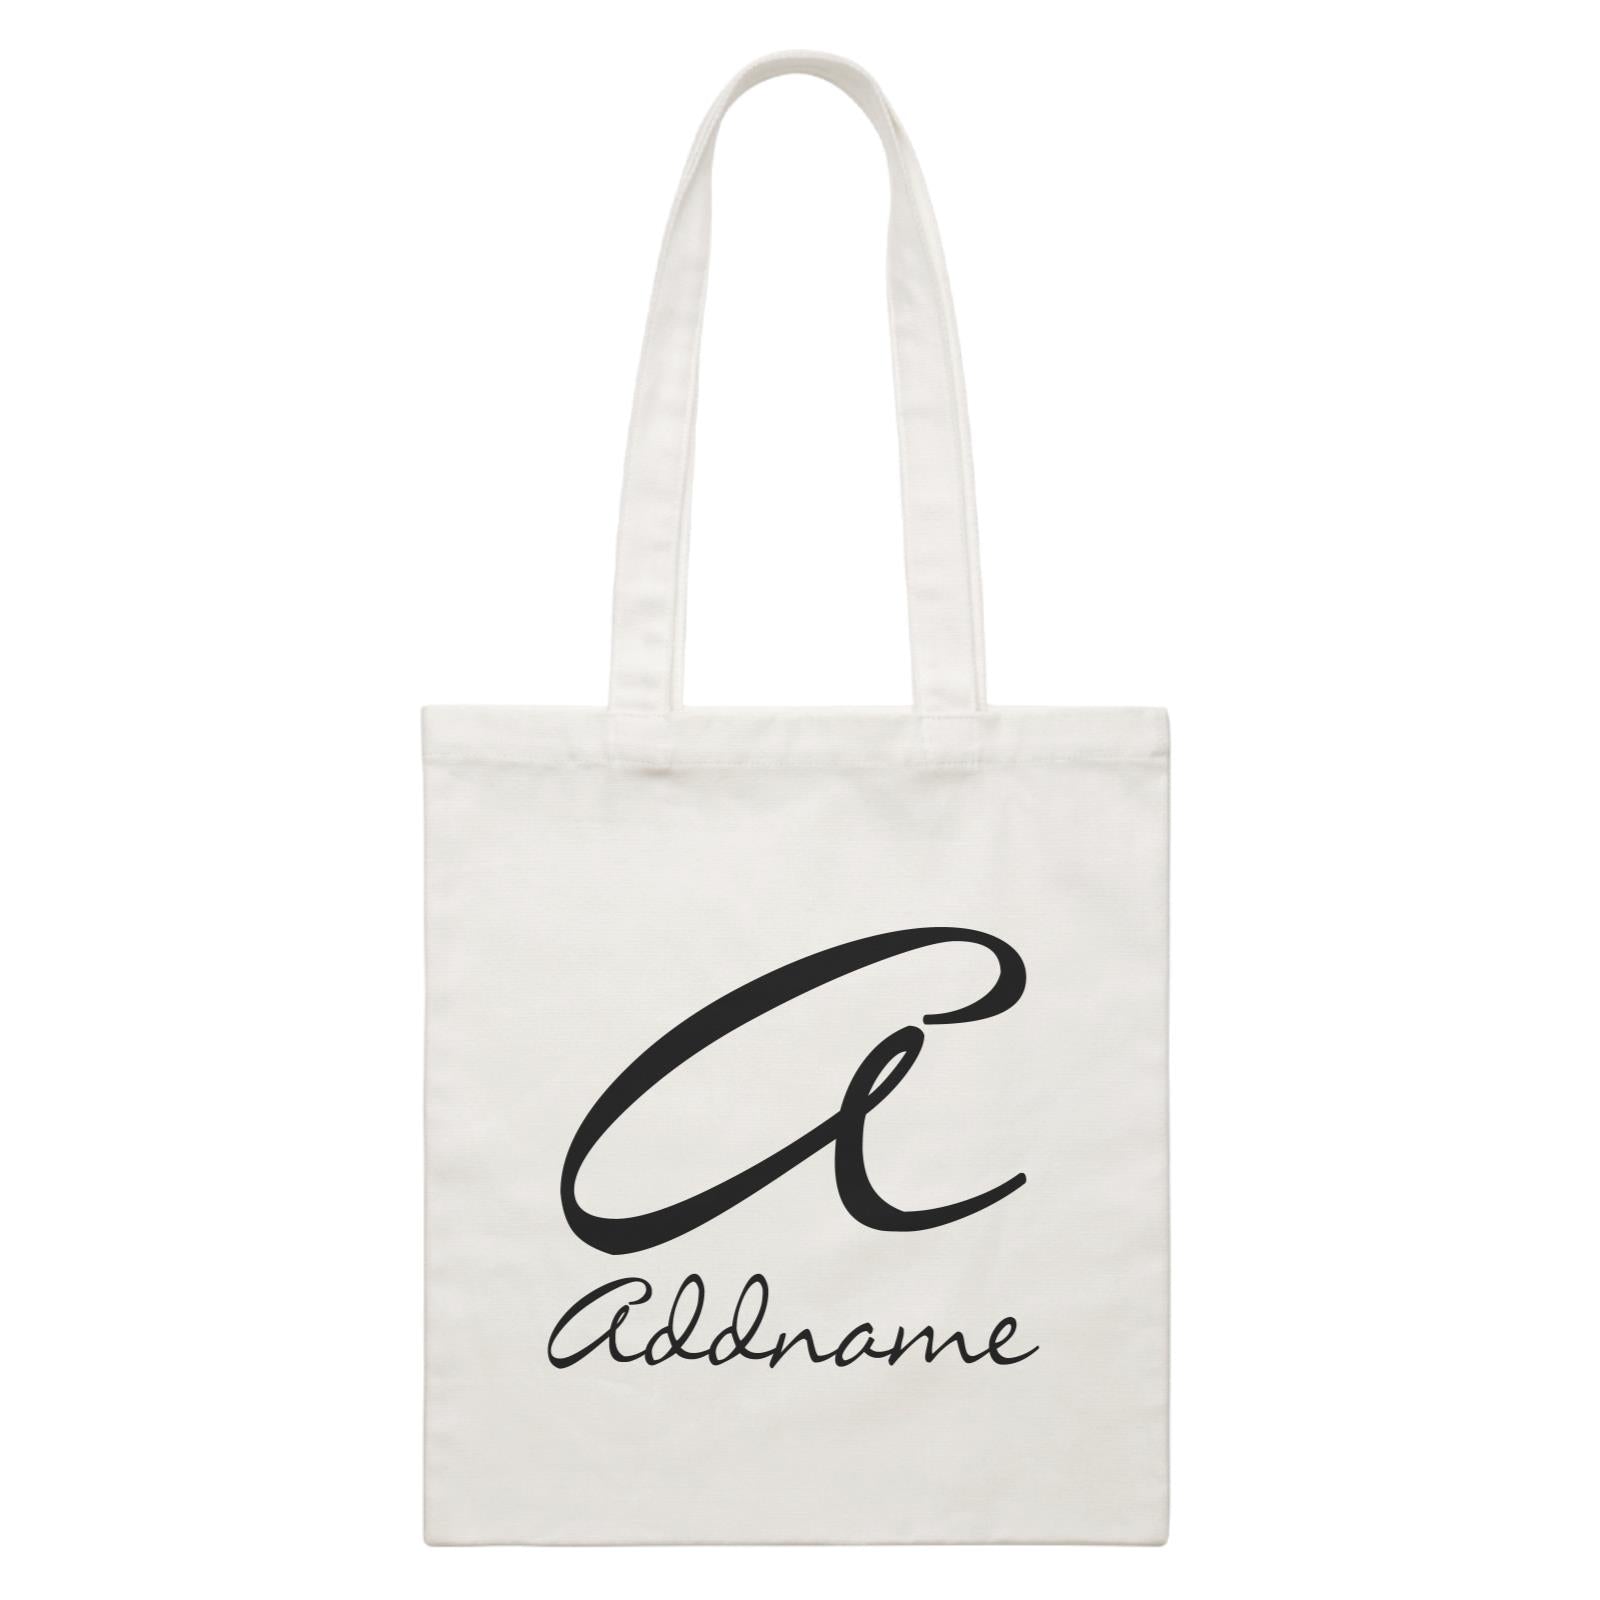 Random Quotes Add Initial and Addname White Canvas Bag